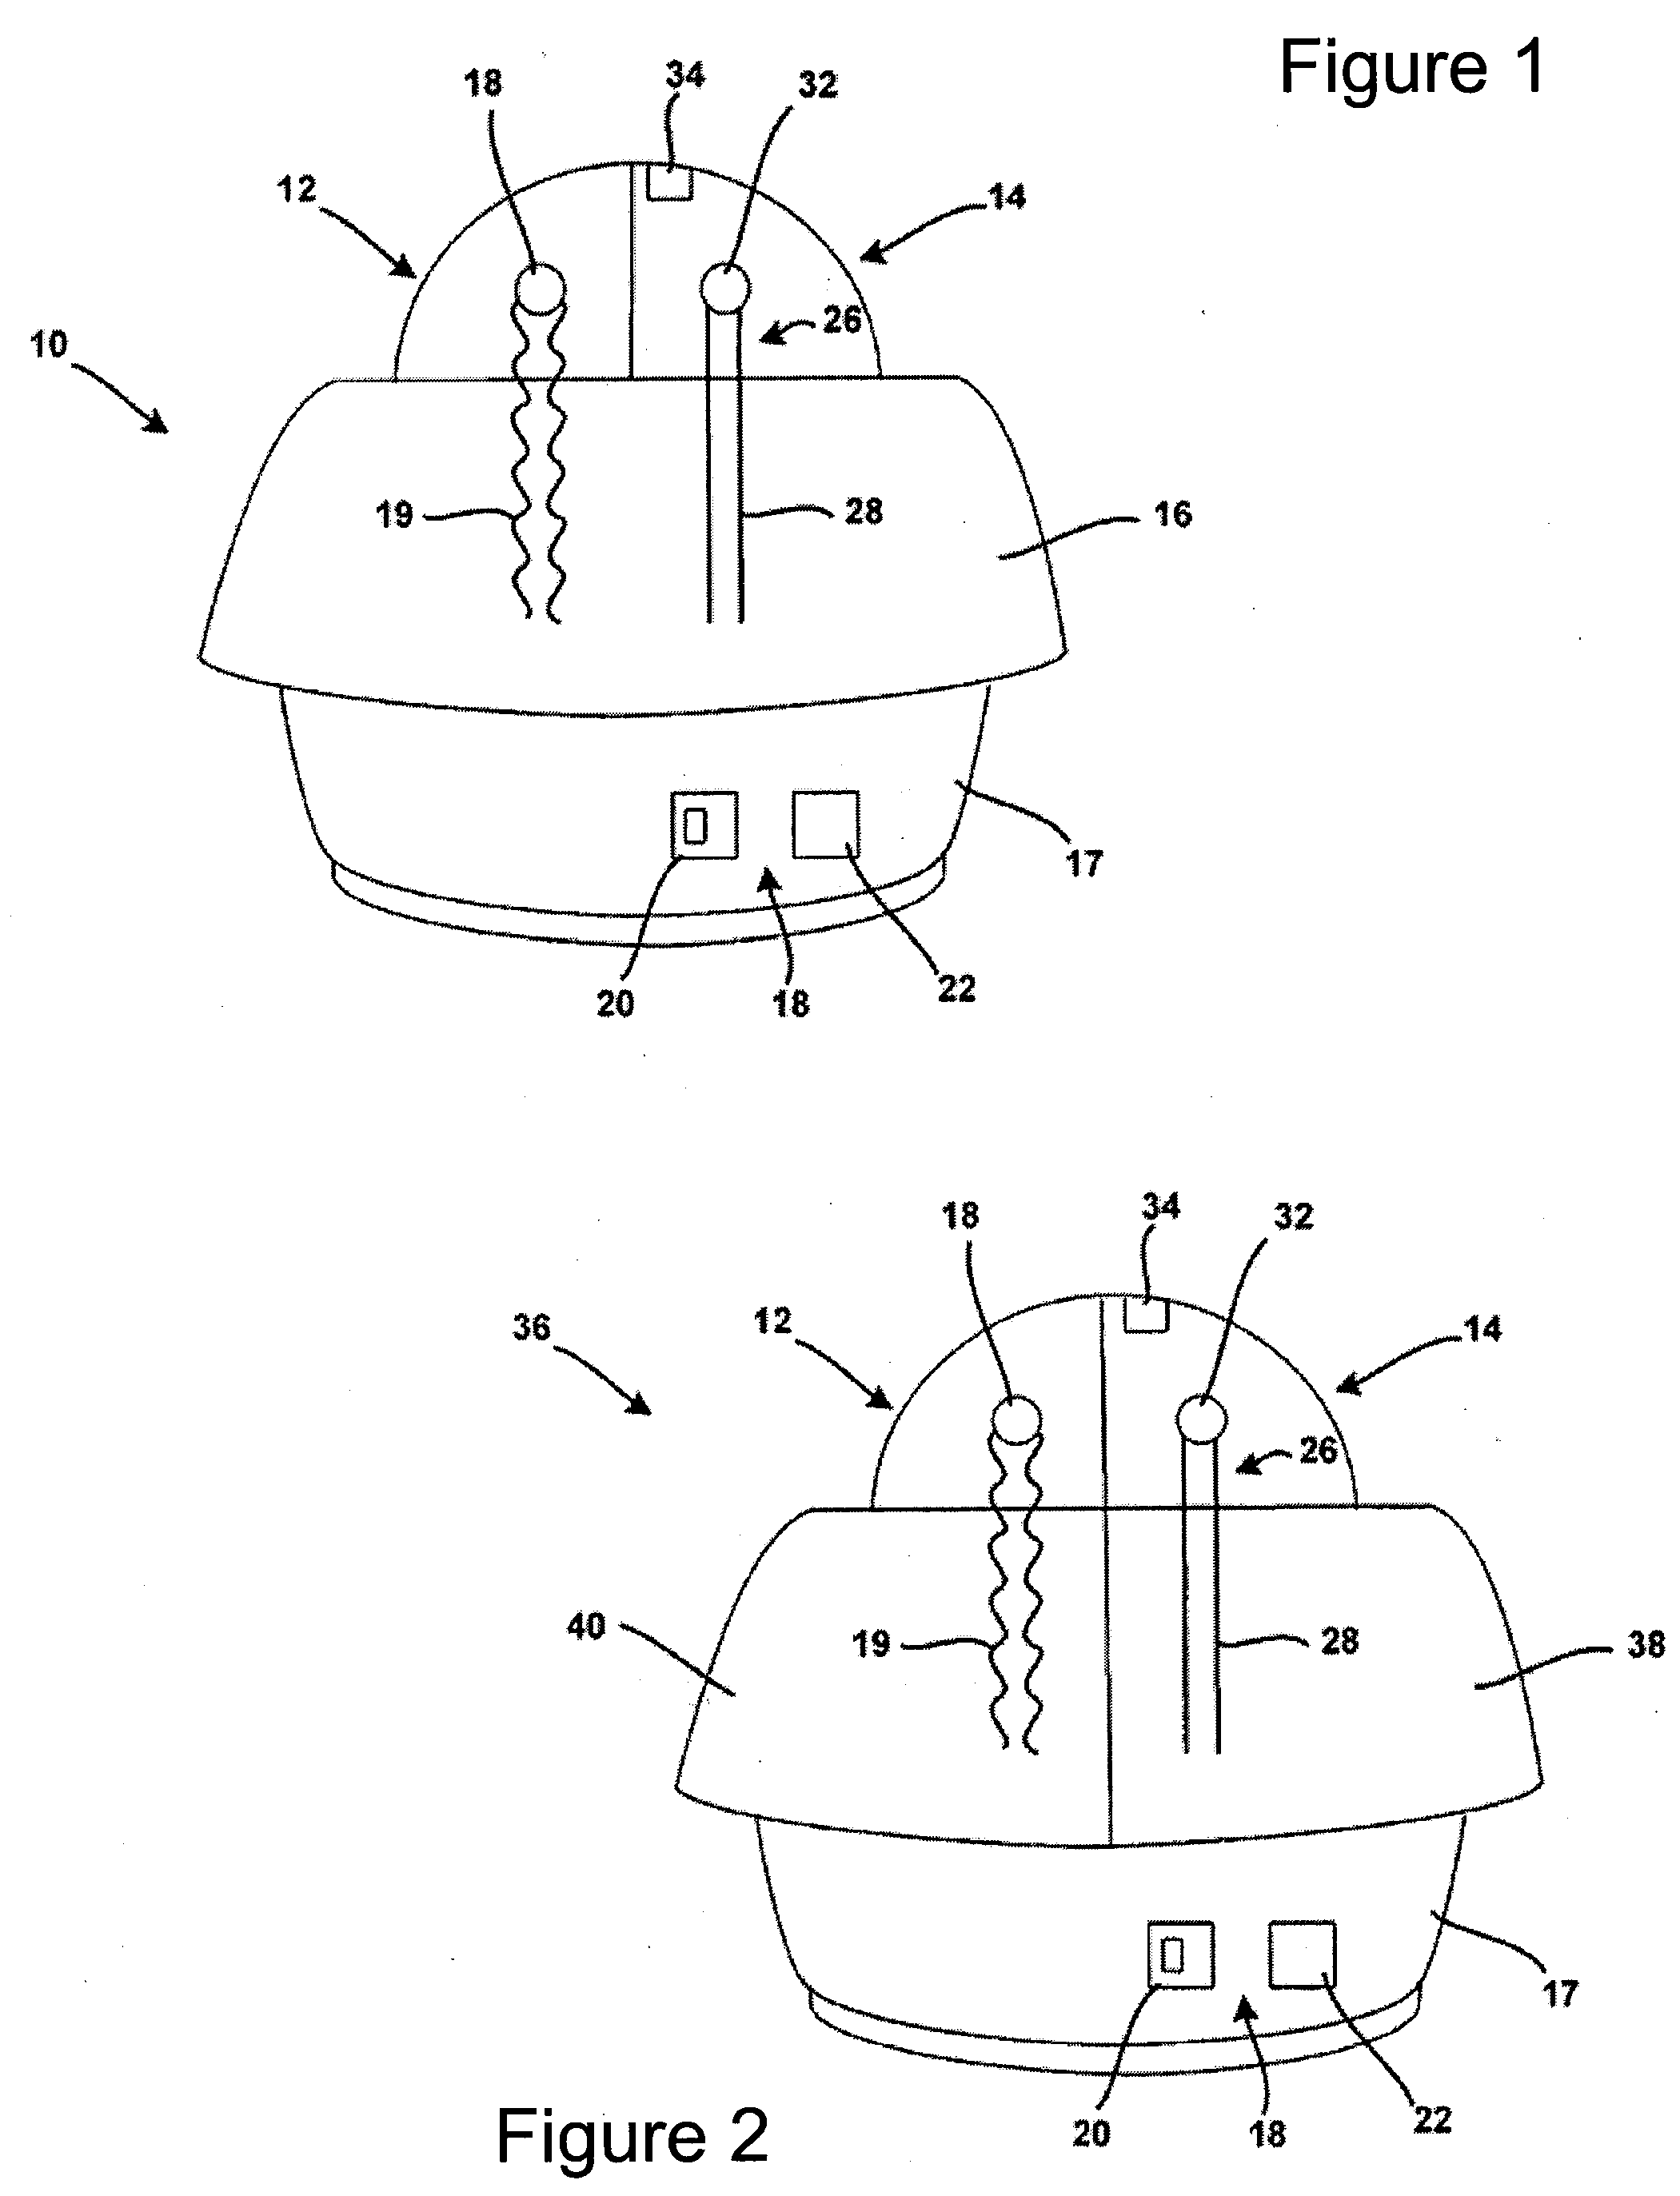 Air Treatment Device Utilizing A Sensor For Activation And Operation